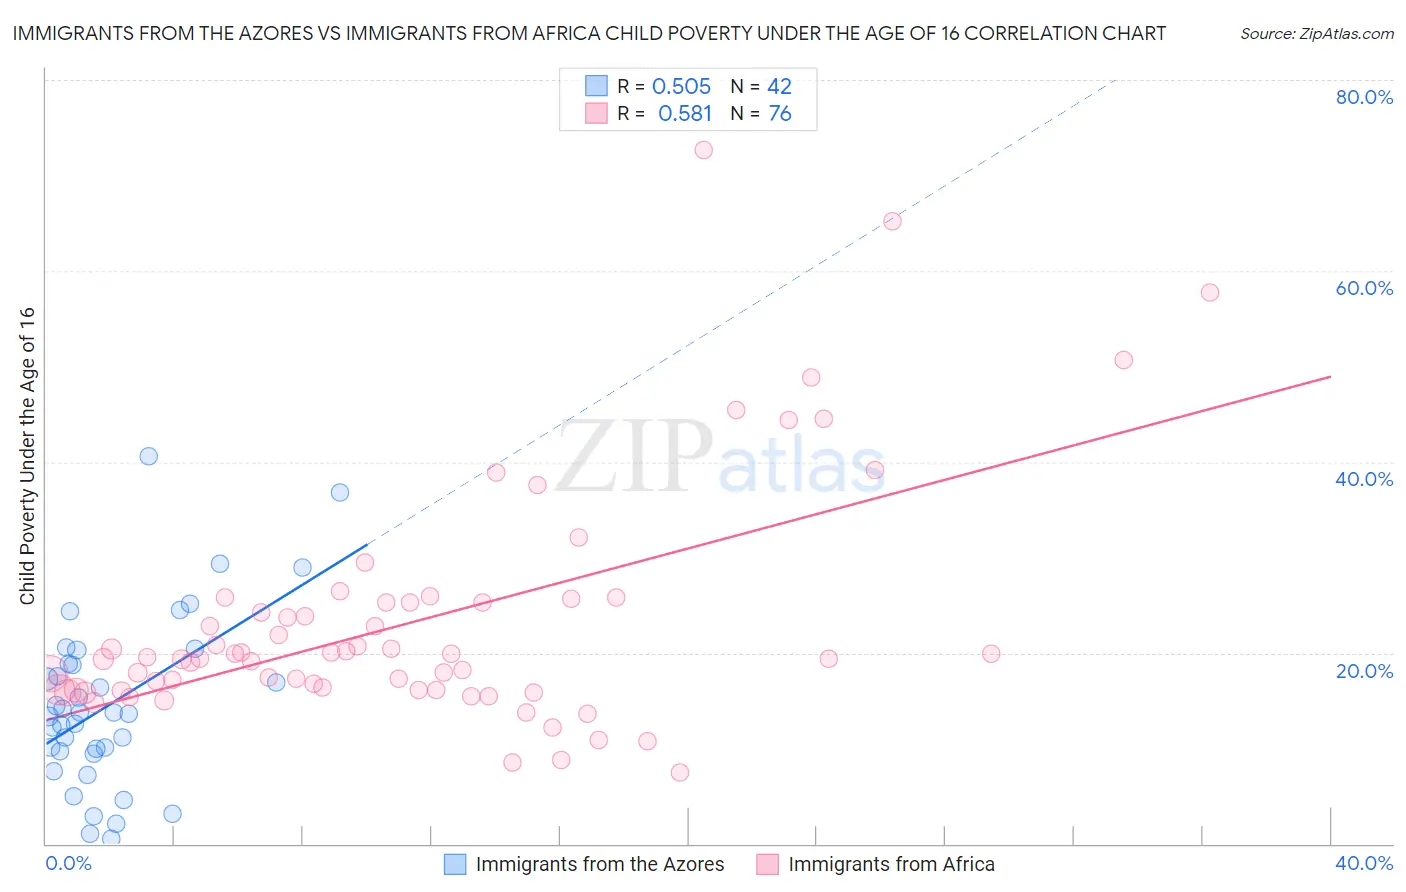 Immigrants from the Azores vs Immigrants from Africa Child Poverty Under the Age of 16